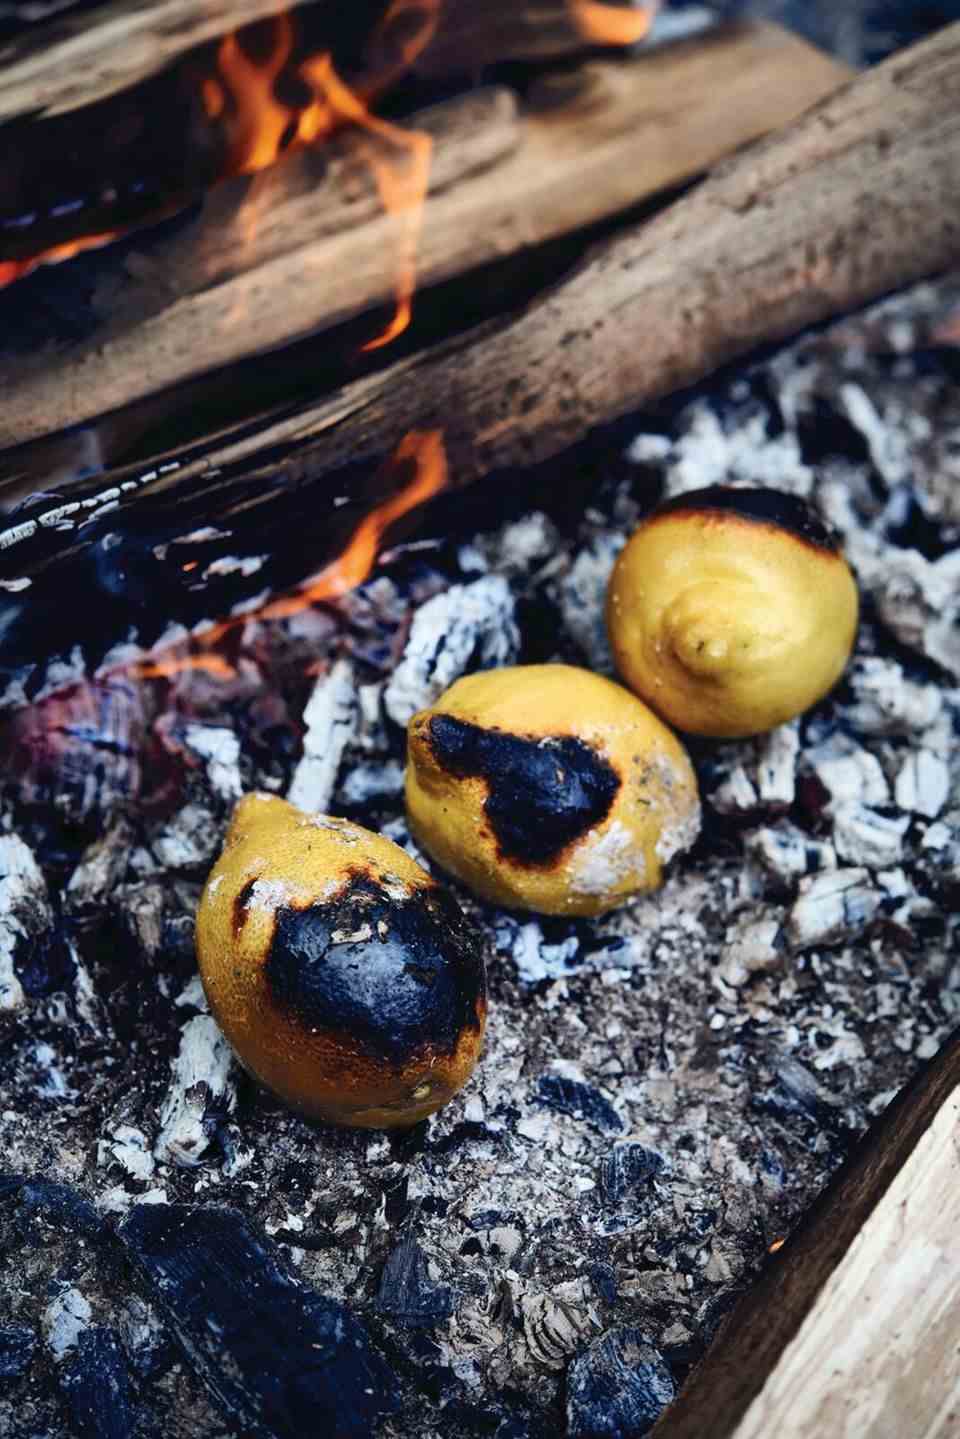 Hot sorbet: The lemon from the embers unfolds its wonderful aroma with the help of the heat.